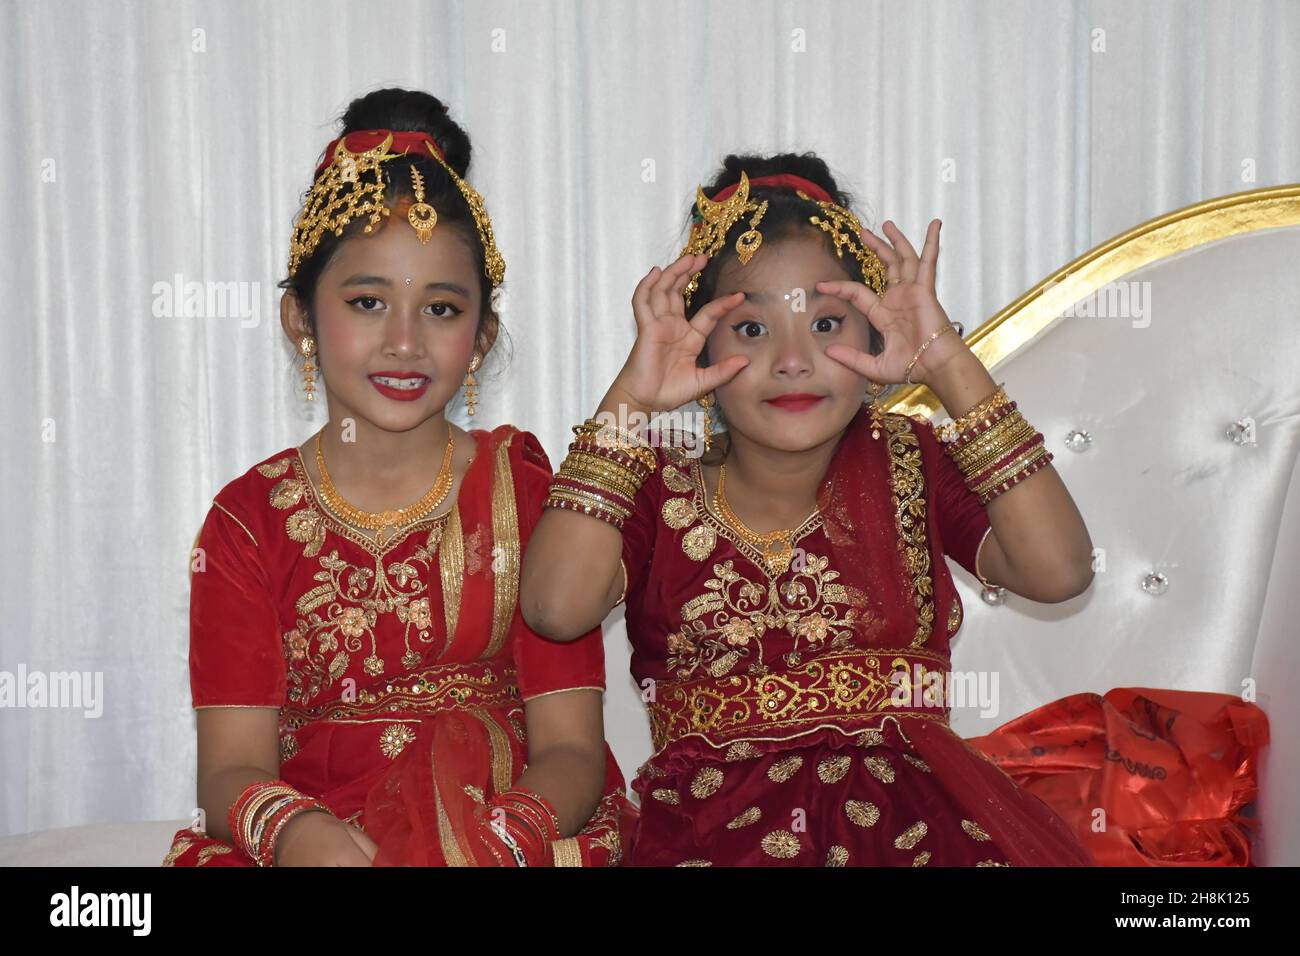 SYDNEY, AUSTRALIA - Apr 24, 2021: The two cheerful girls in traditional Hindu costumes for EEHI function in Sydney, Australia Stock Photo